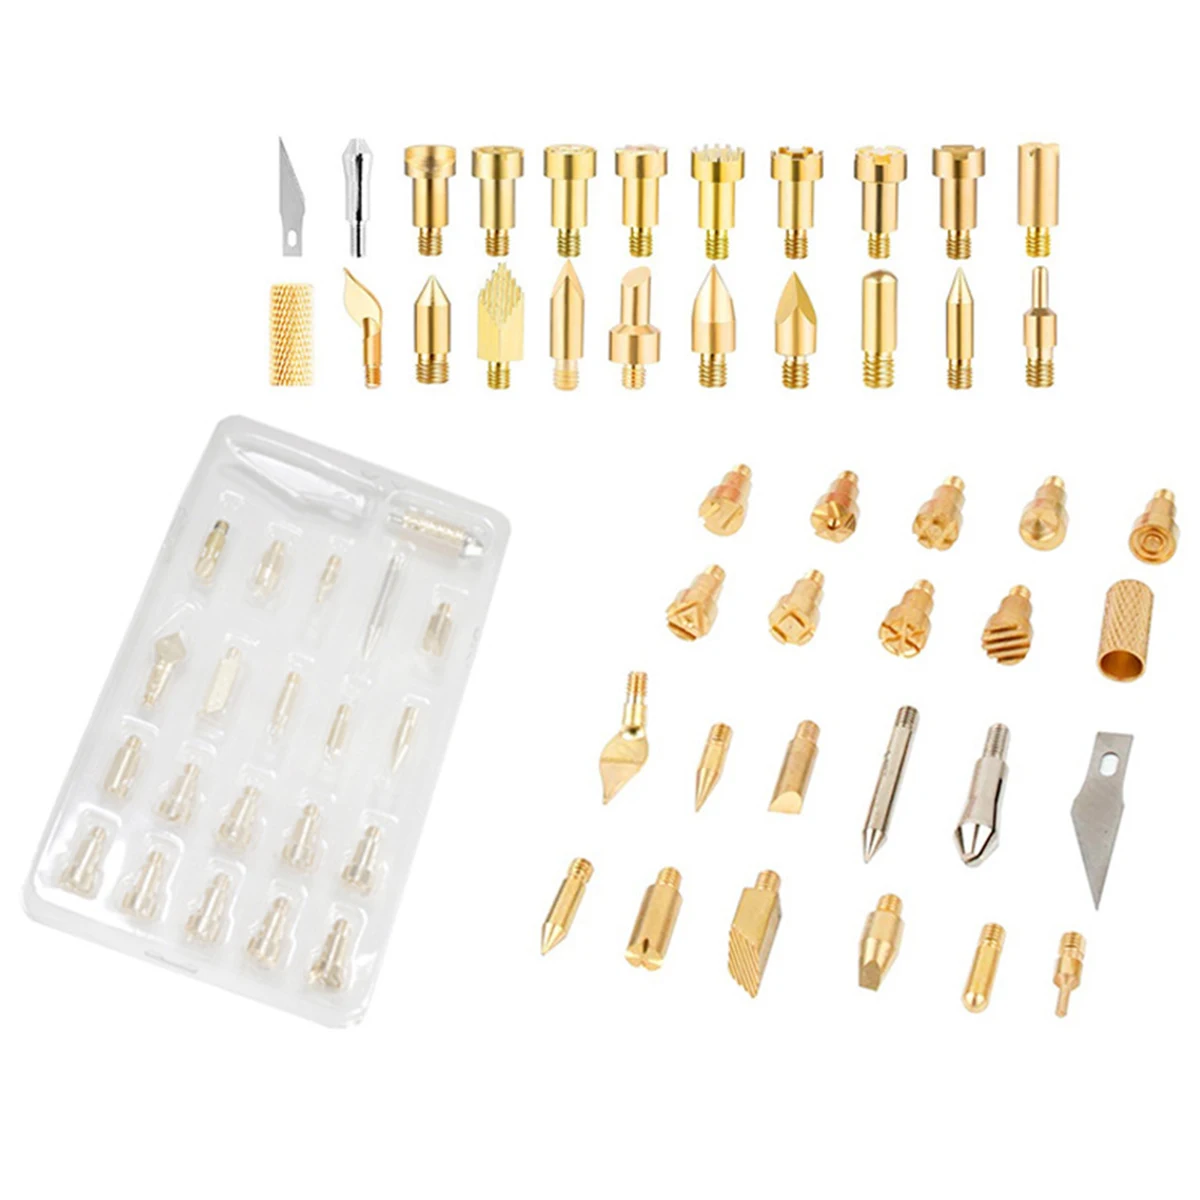 

ANENG 22pcs Tips Stencil Soldering Iron Tip Works with 30-60W wood burning pen For Pyrography Woodworking Carving Tool